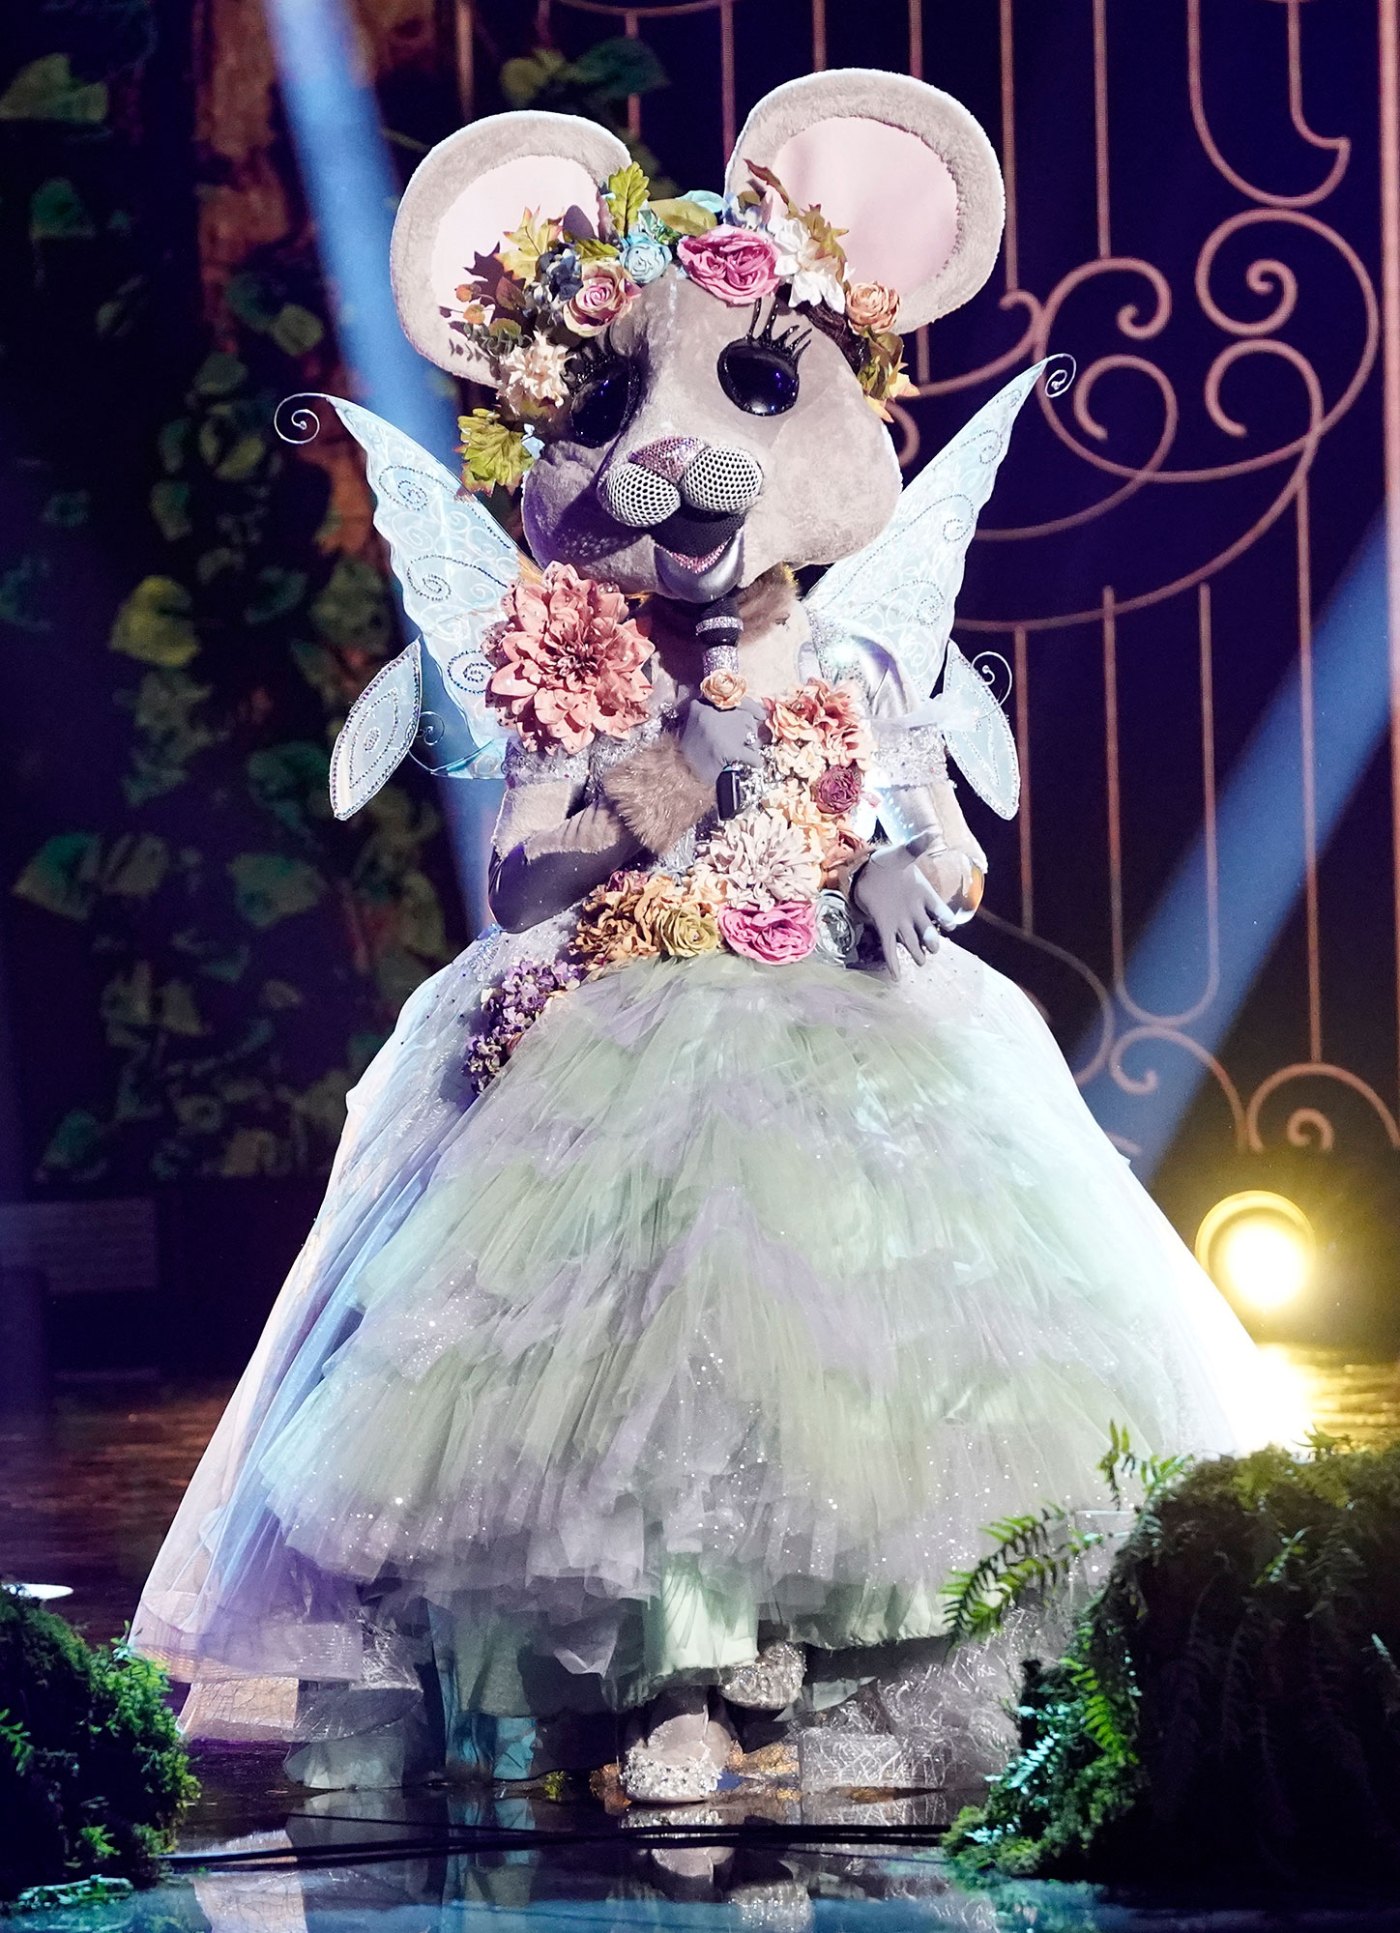 'The Masked Singer' Introduces 6 New Characters All the Clues